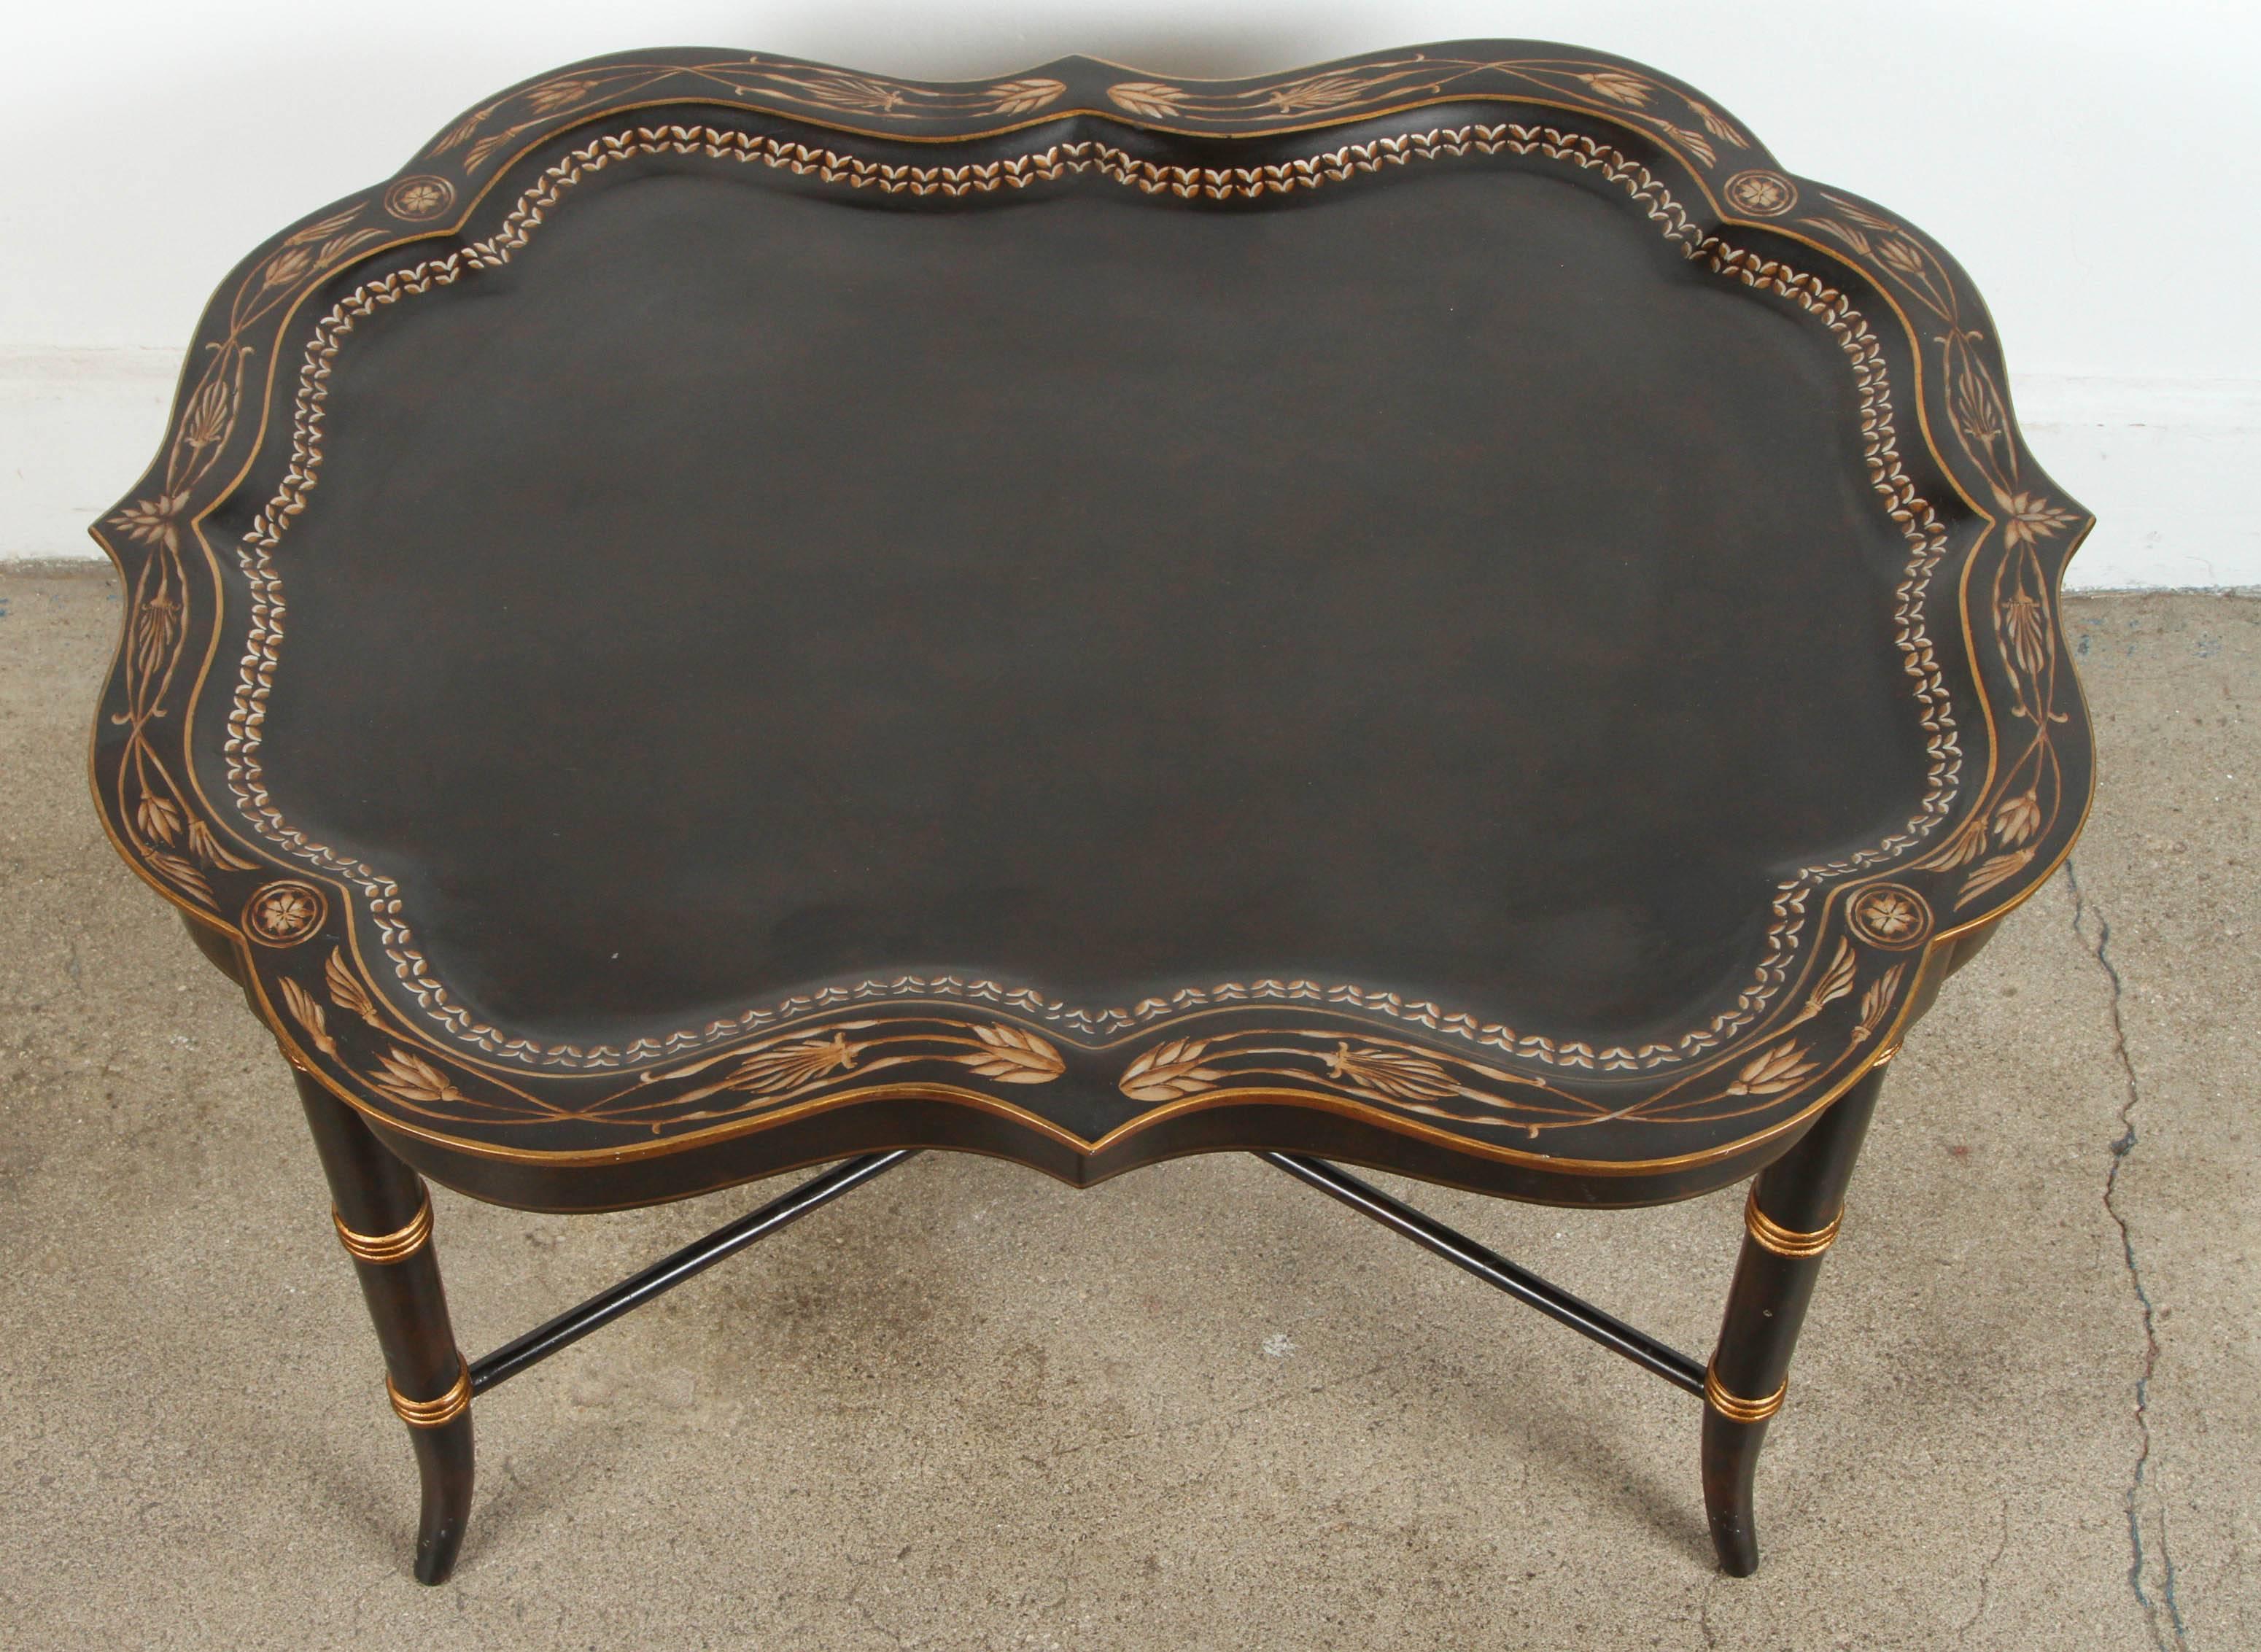 Late Victorian Hand-Painted Black Tray Coffee Table by Maitland-Smith